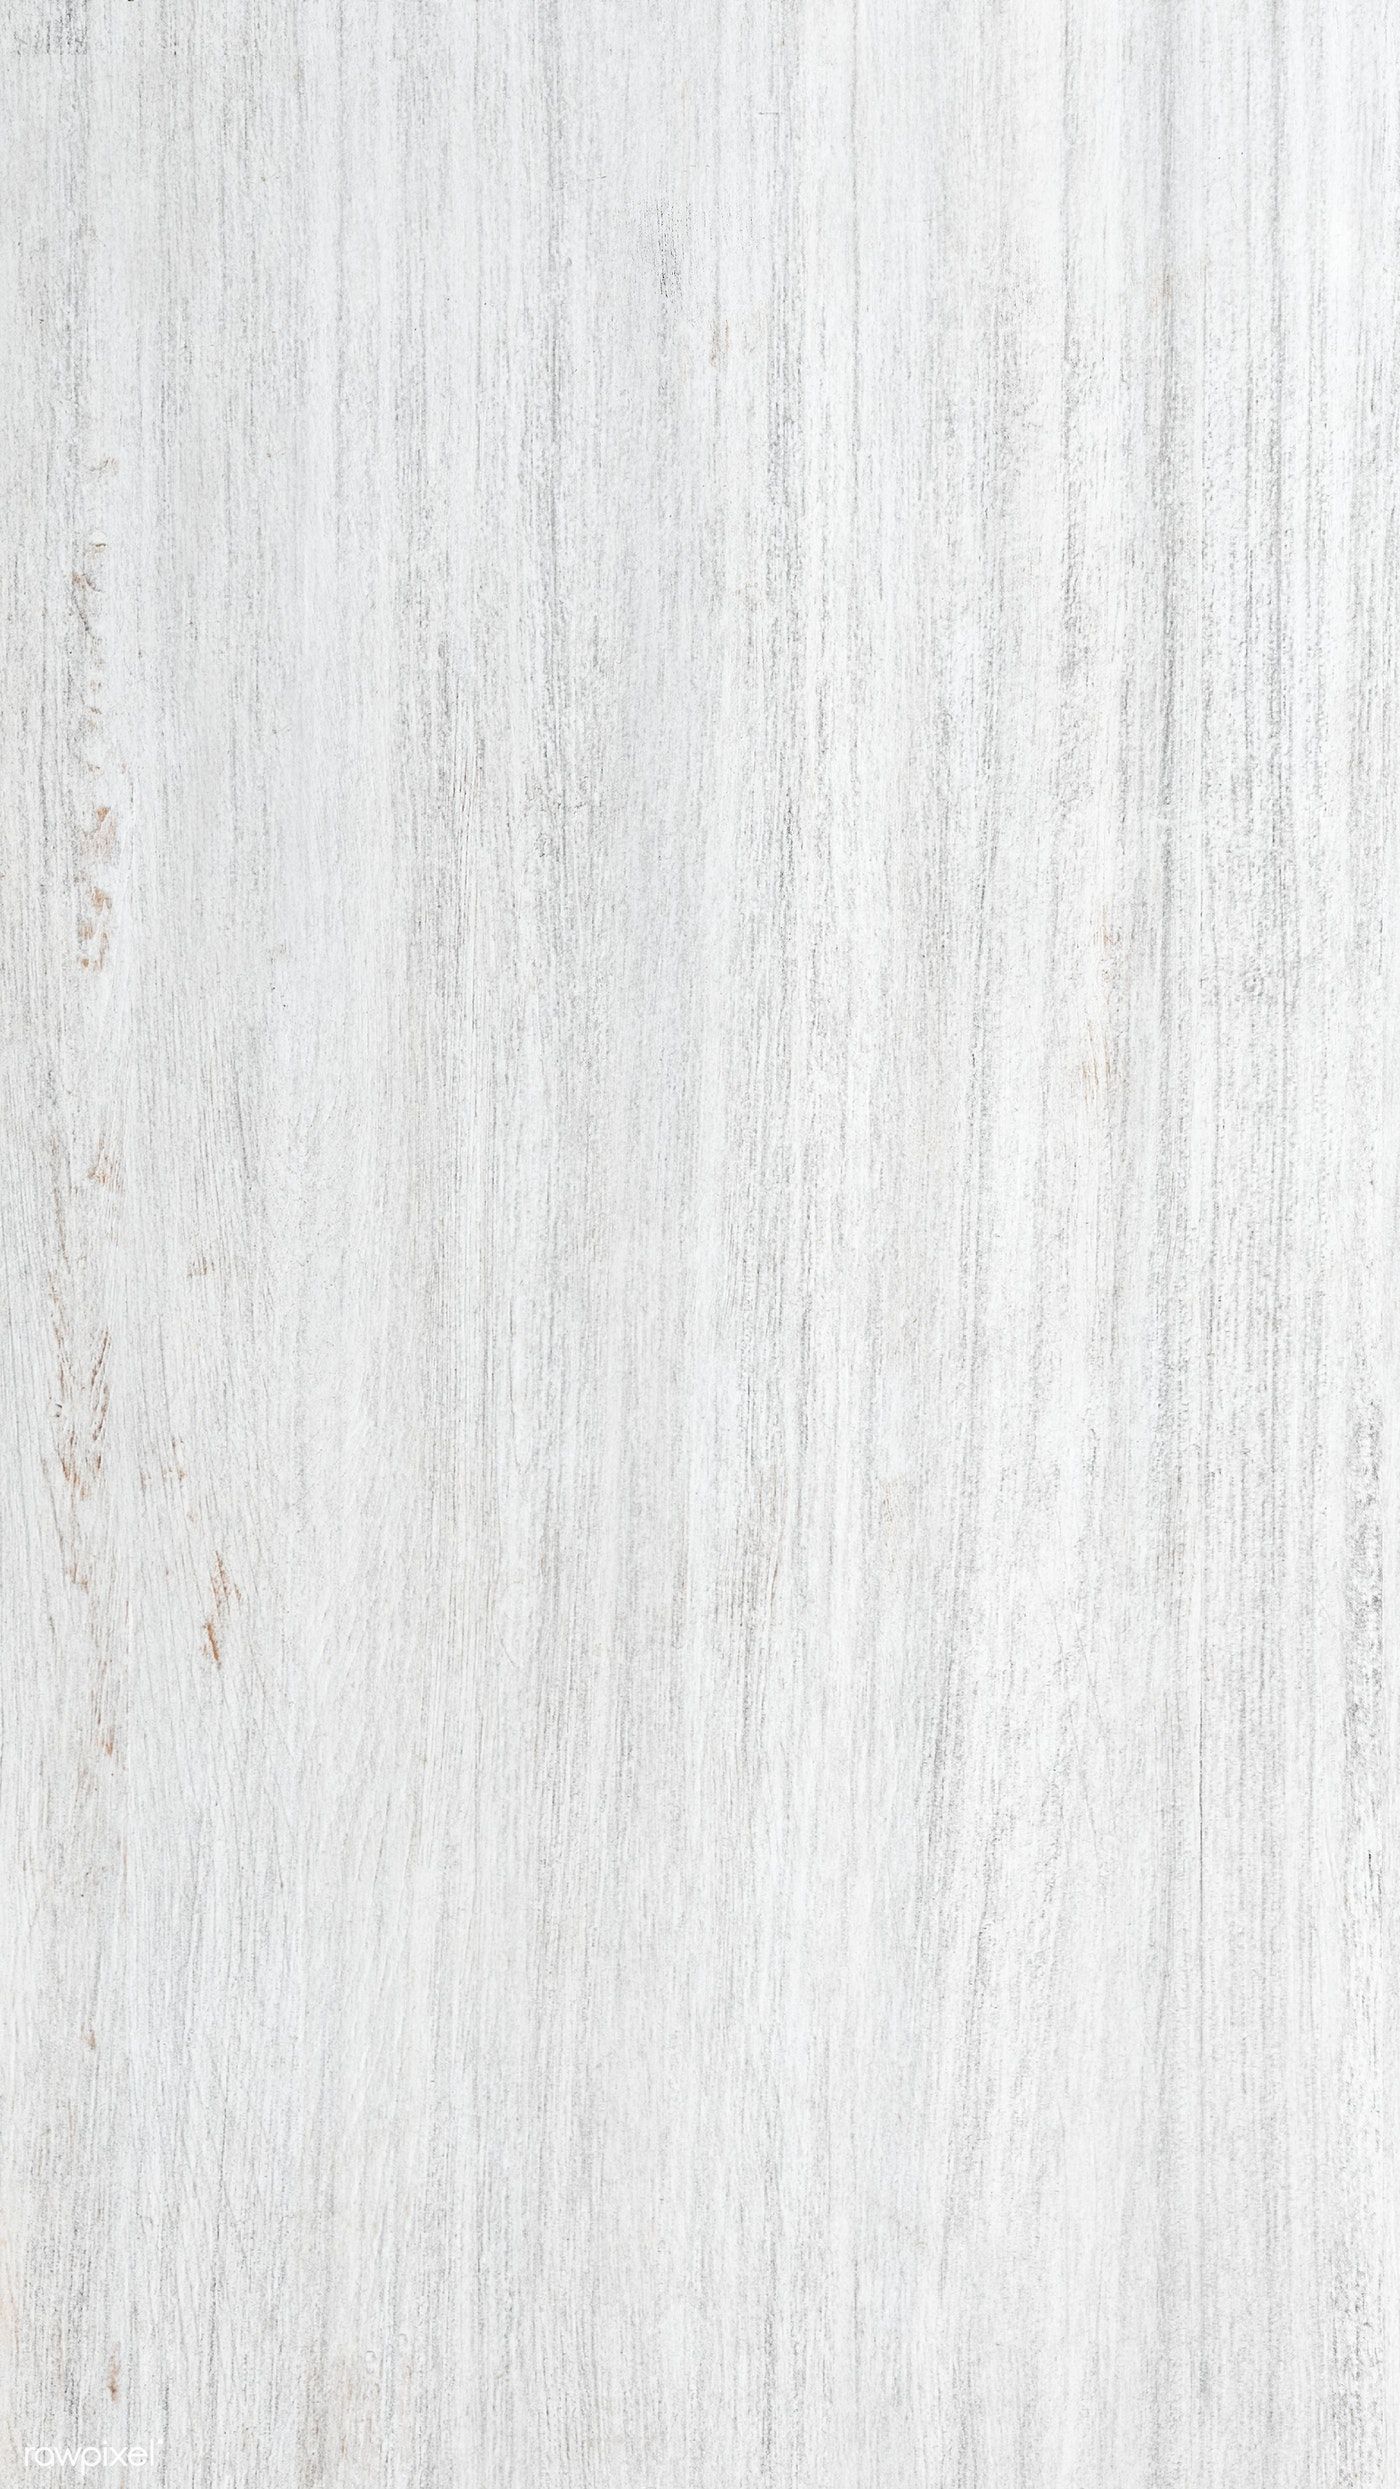 White wood textured mobile wallpaper free image by rawpixelcom